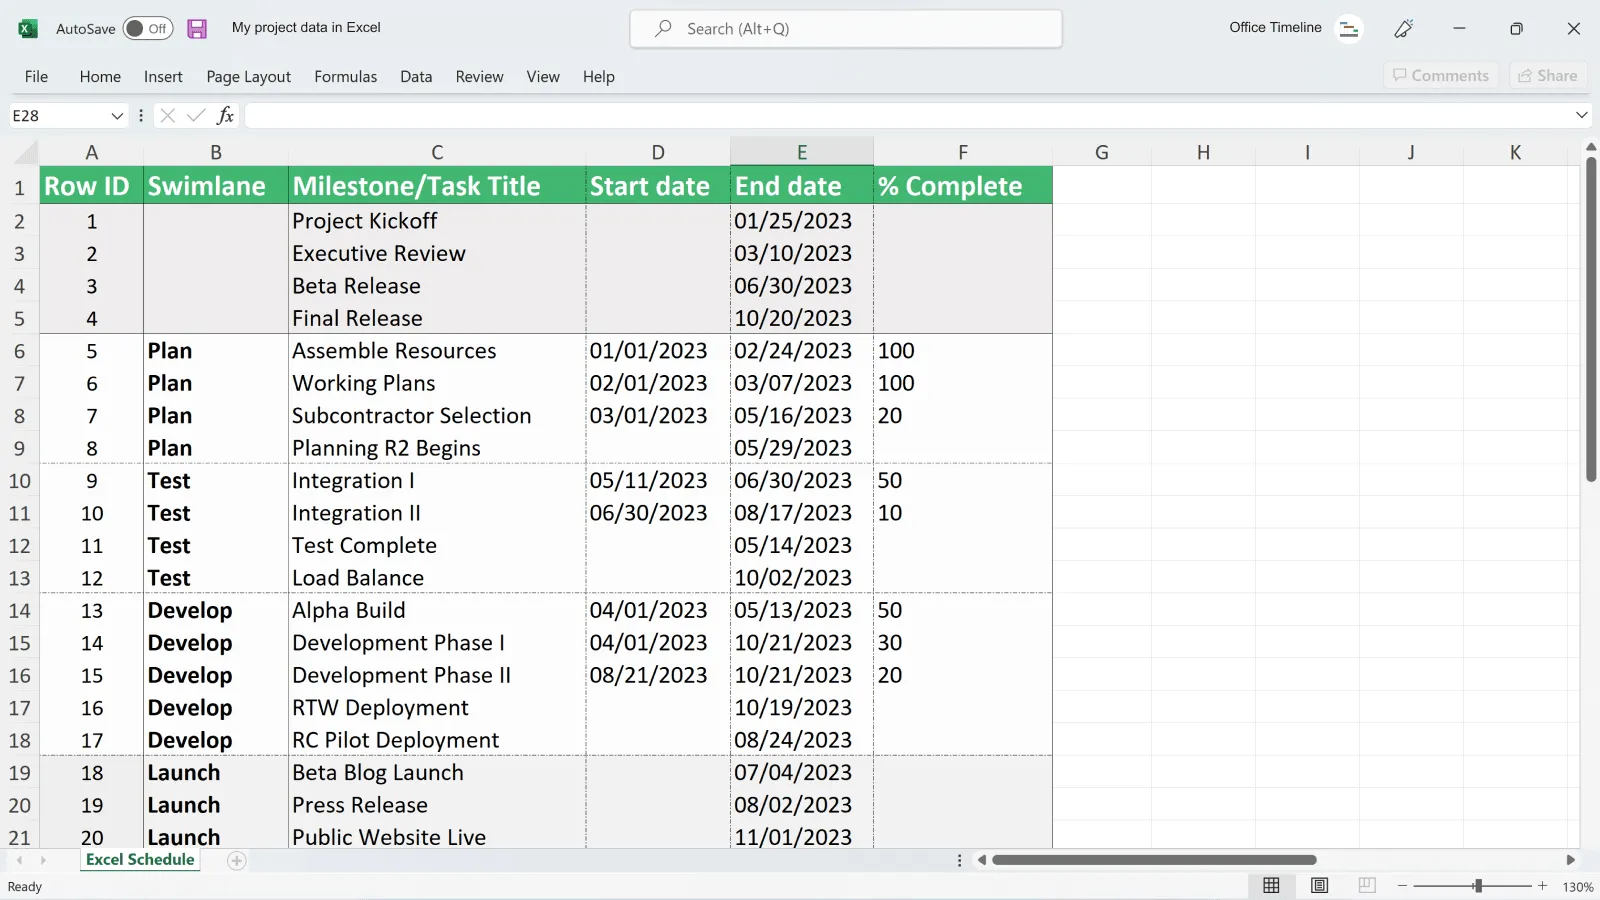 Project data in Excel before importing into Office Timeline Pro